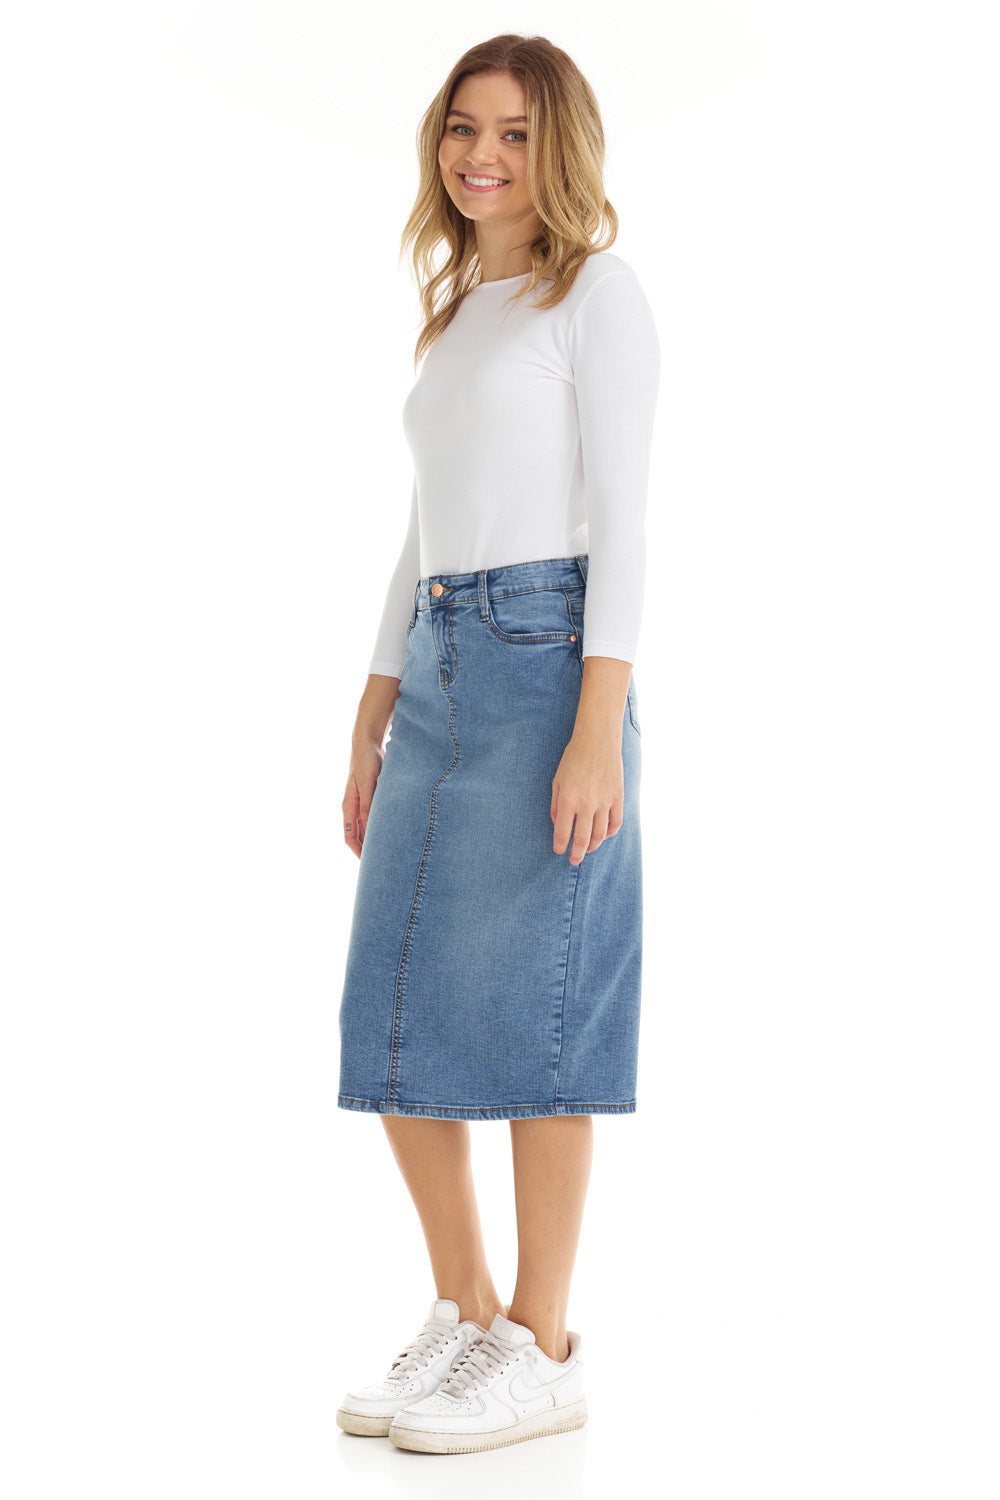 Stylish and Modest Women's Clothing for Everyday Comfort and